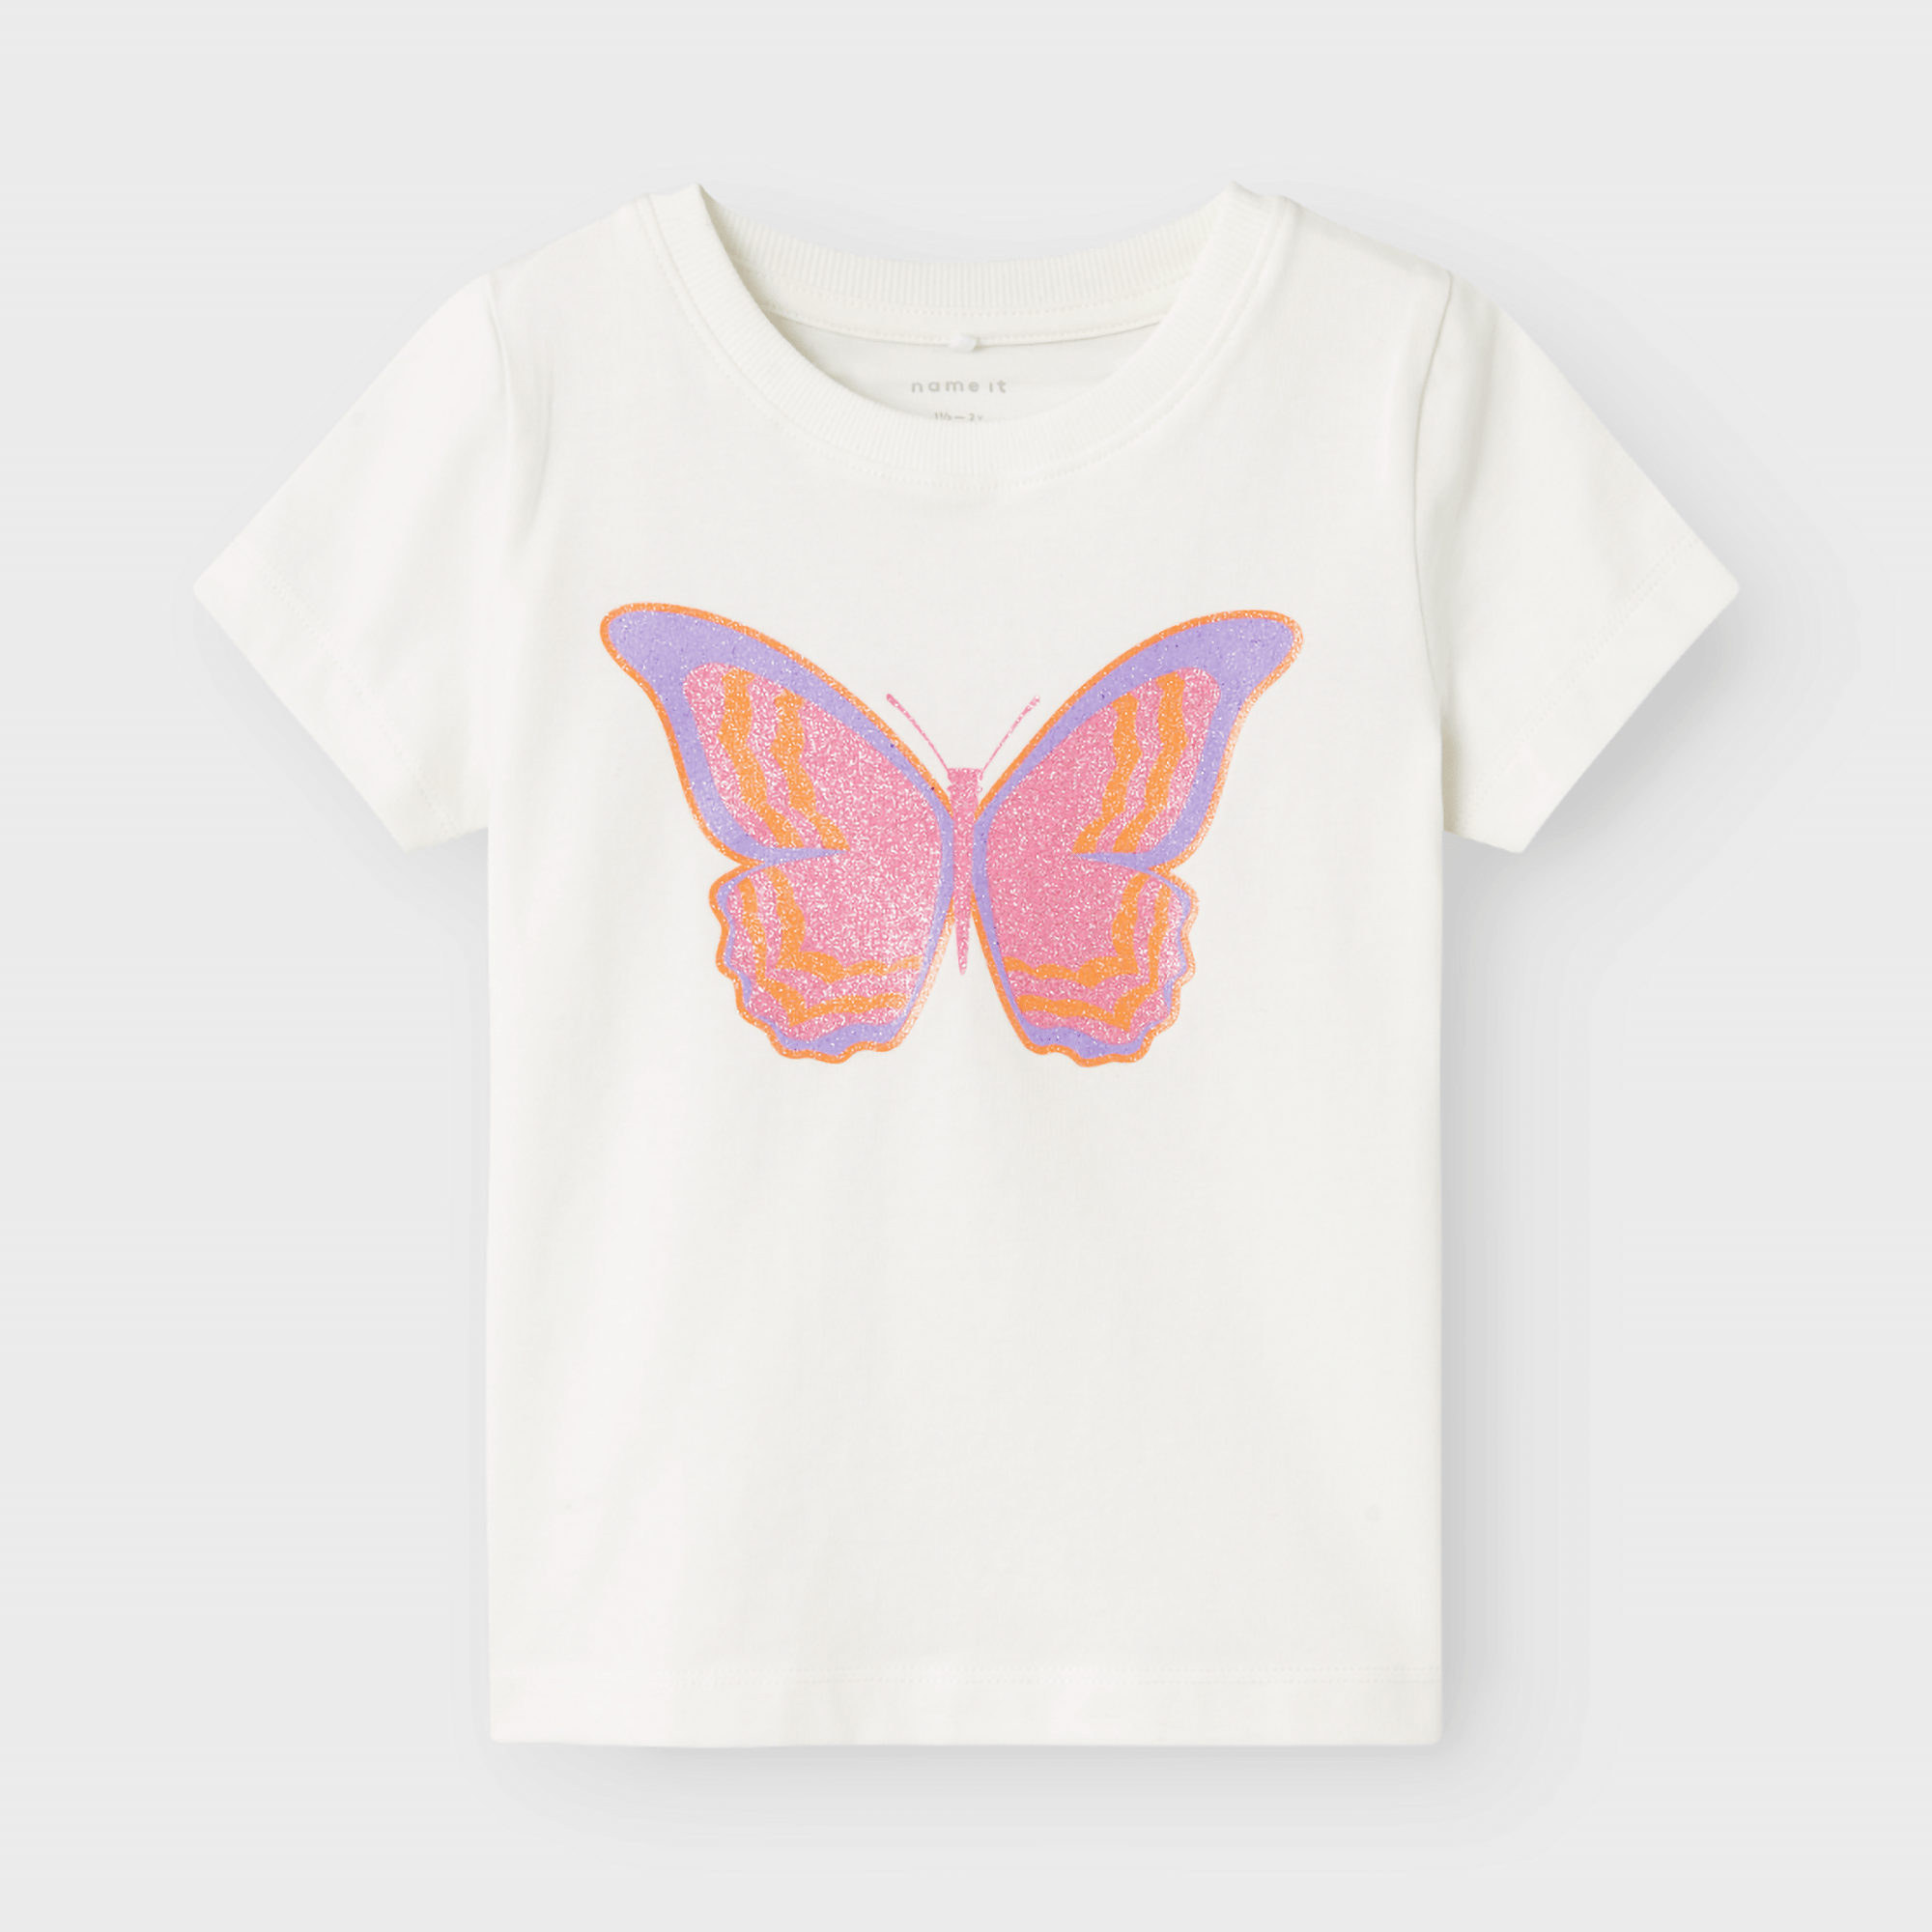 T-Shirt Butterfly name it Weiß M2000585821203 1